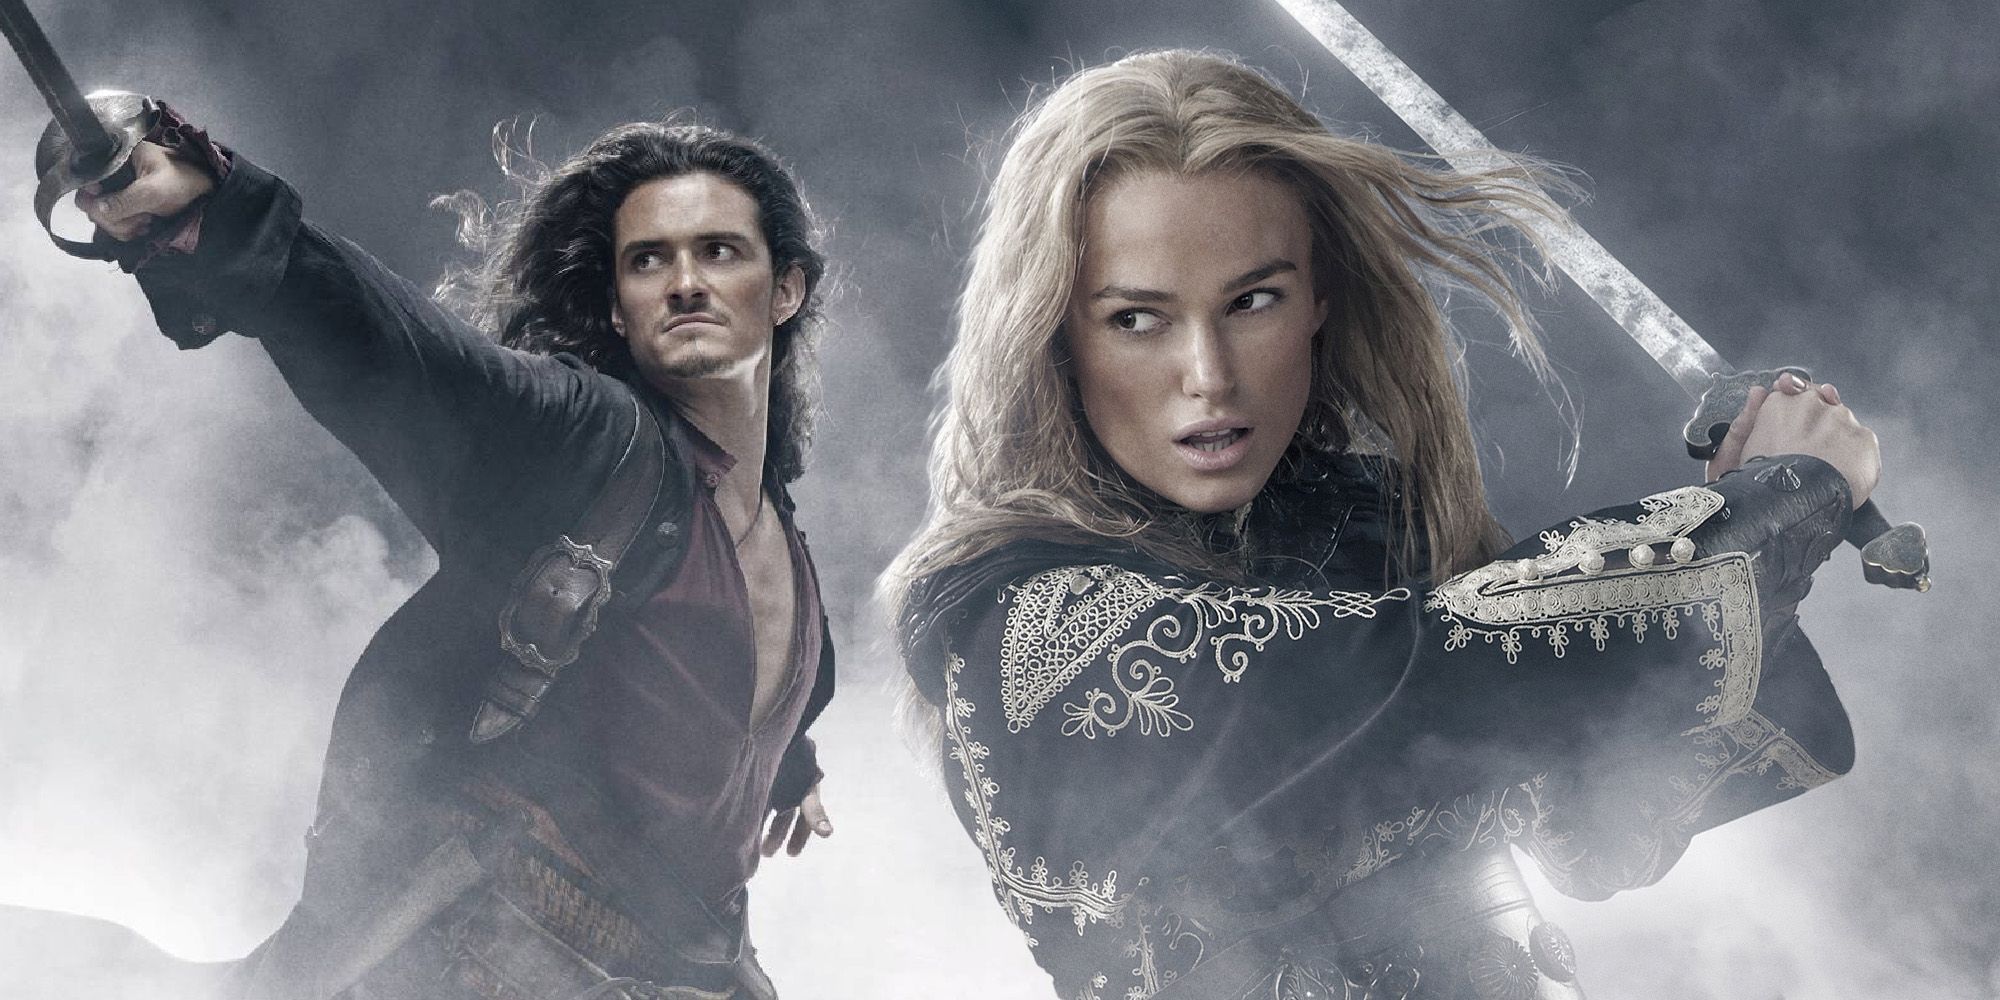 A blended image features Orlando Bloom as Will Turner and Keira Knightley as Elizabeth Swann in Pirates of the Caribbean 3 promotional art